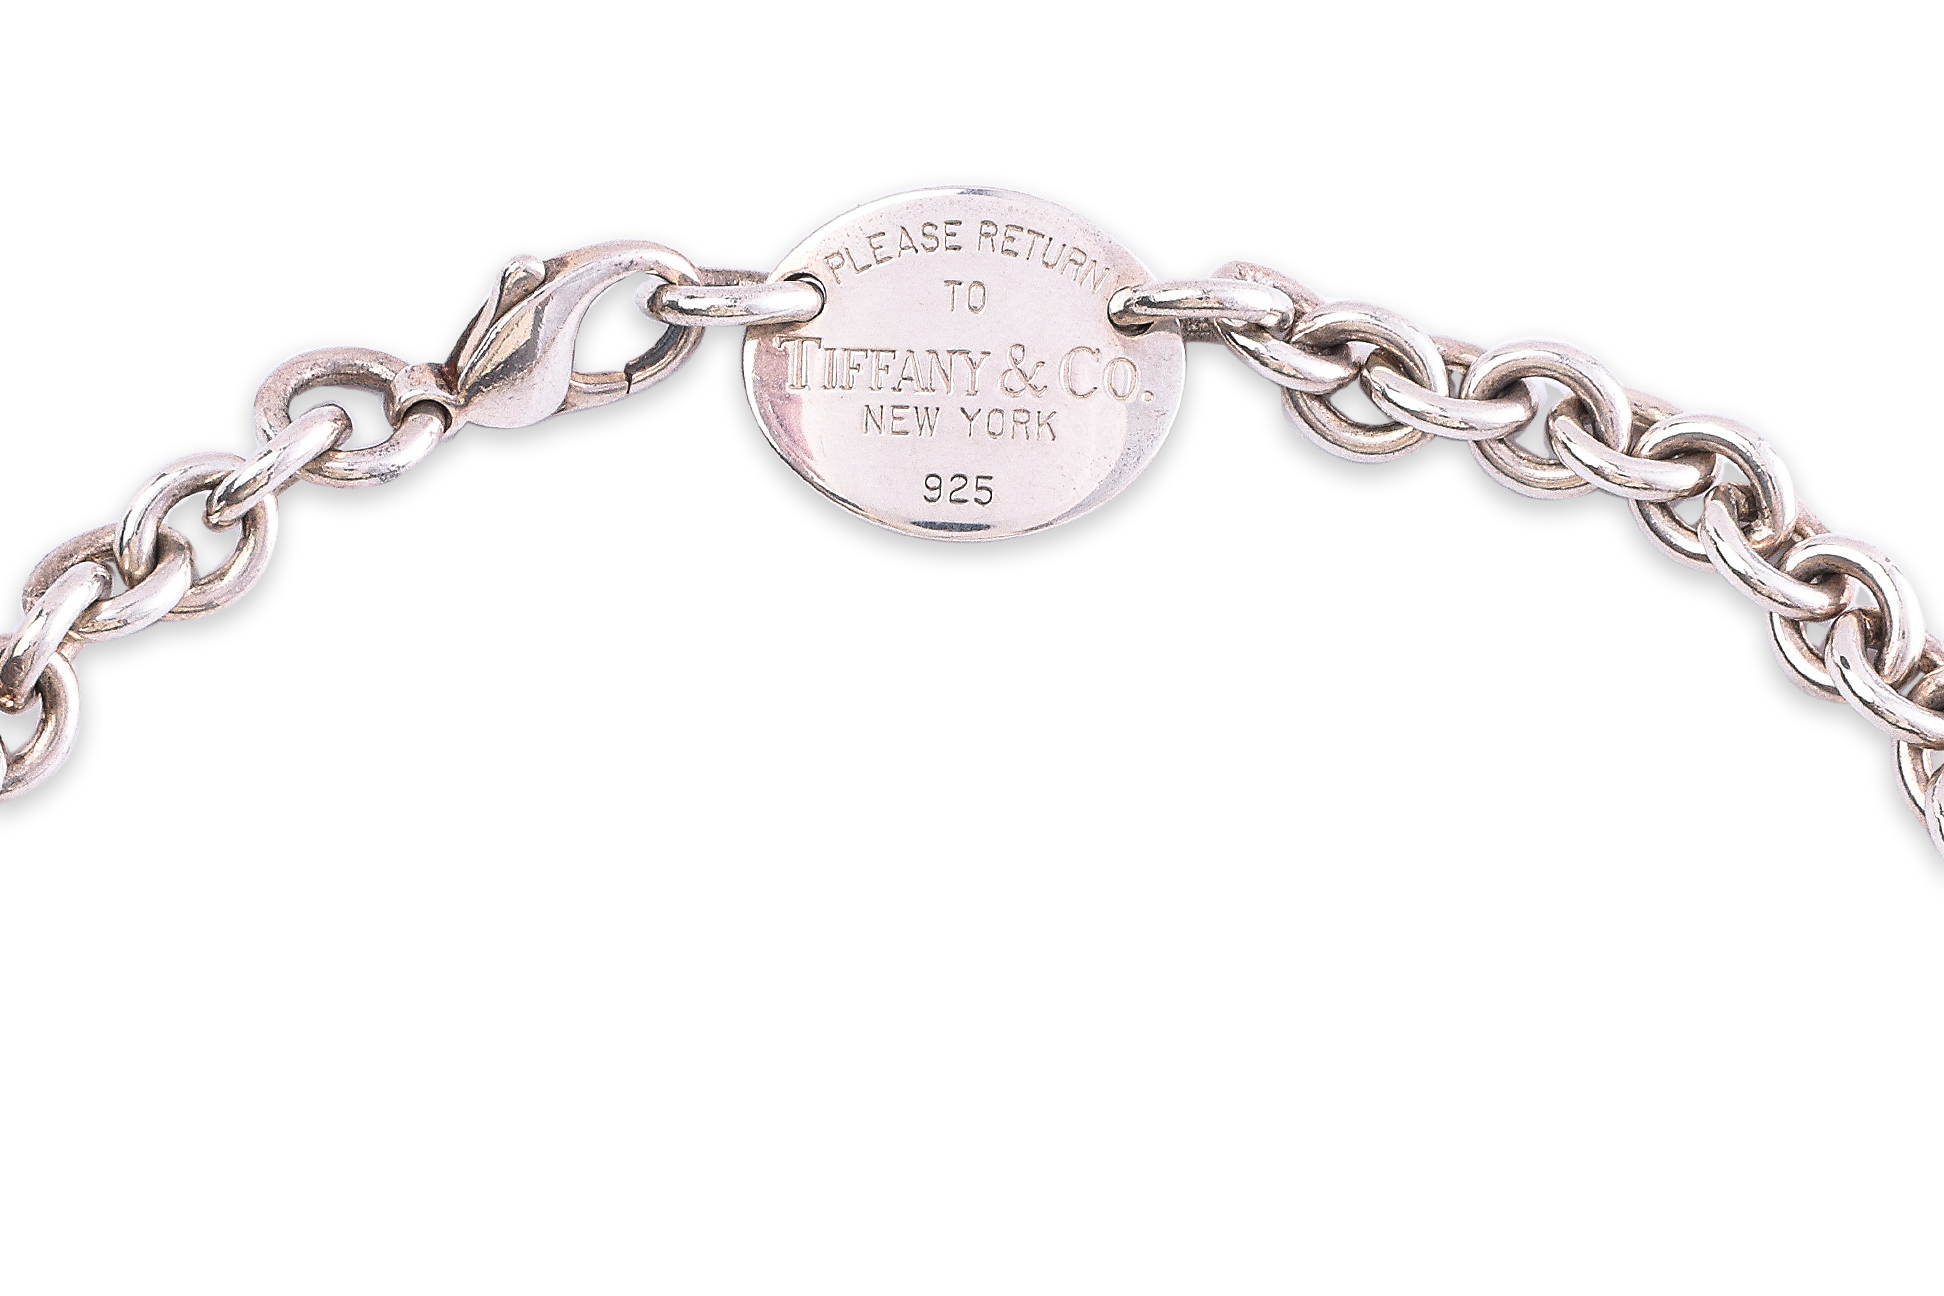 A TIFFANY & CO. OVAL SILVER TAG CHARM CHOKER NECKLACE - Image 2 of 5